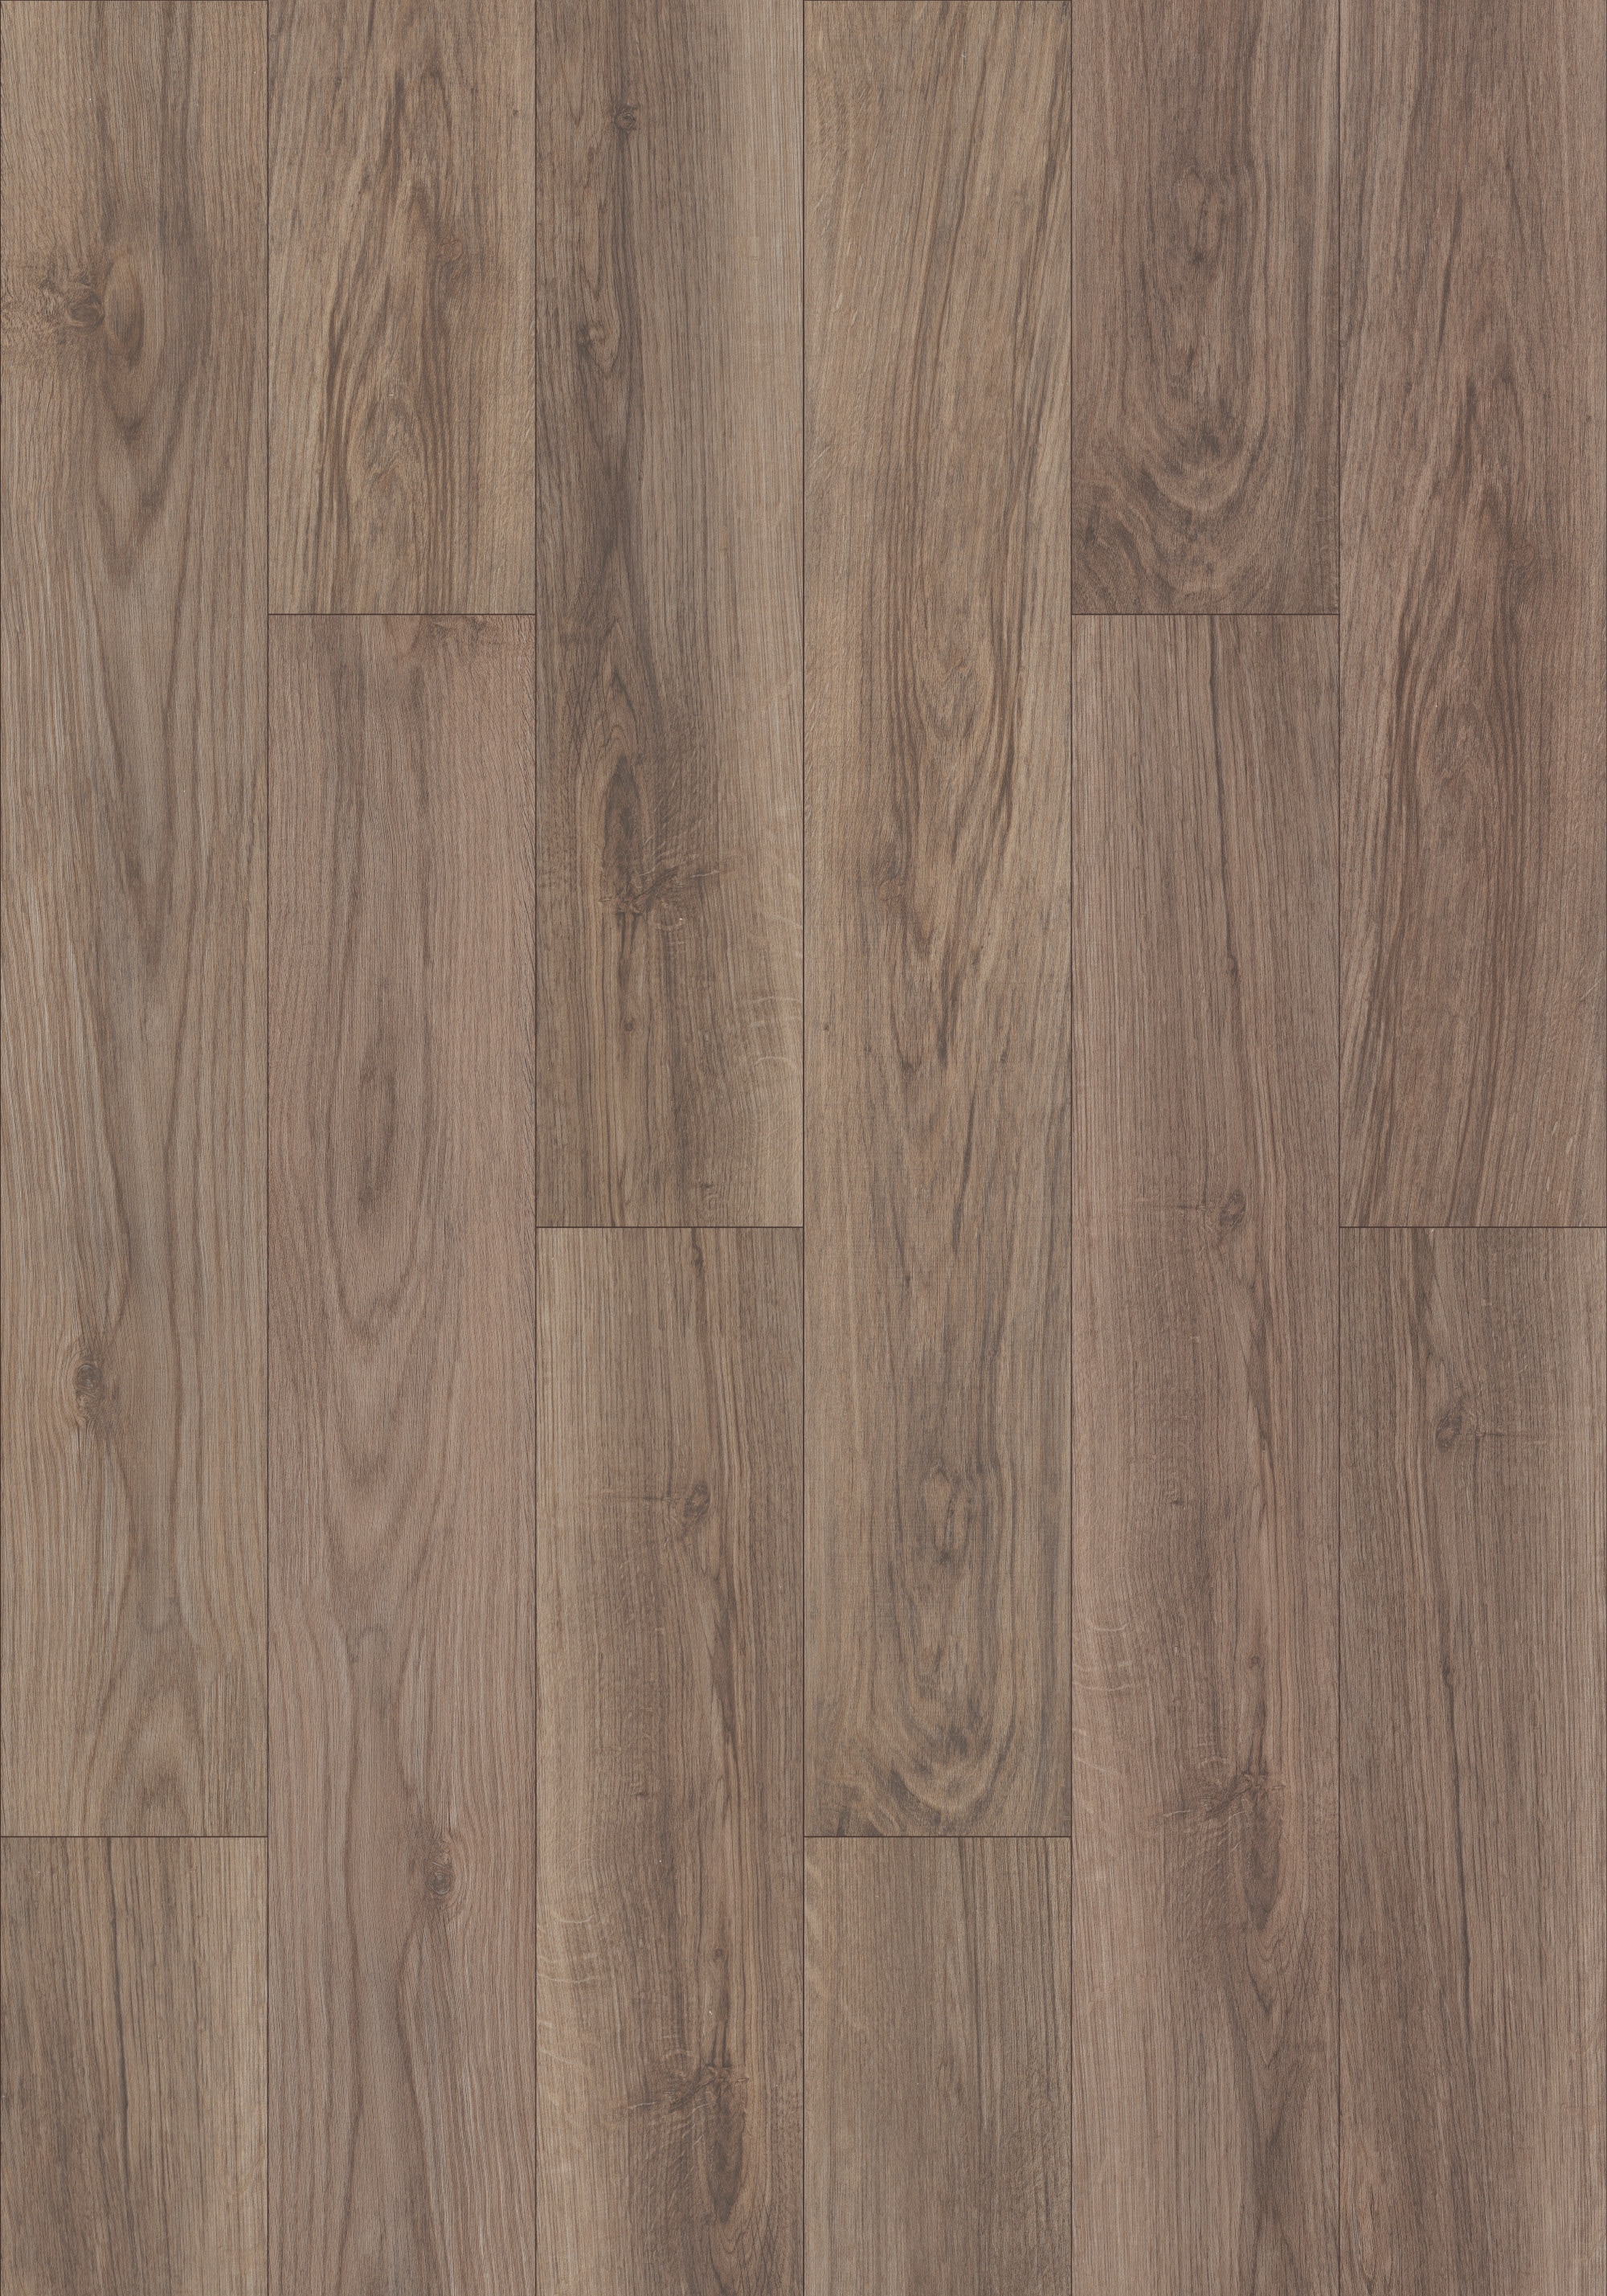 Shaw Rustic Design Farmhouse Oak 7 In, How Thick Does Vinyl Flooring Need To Be